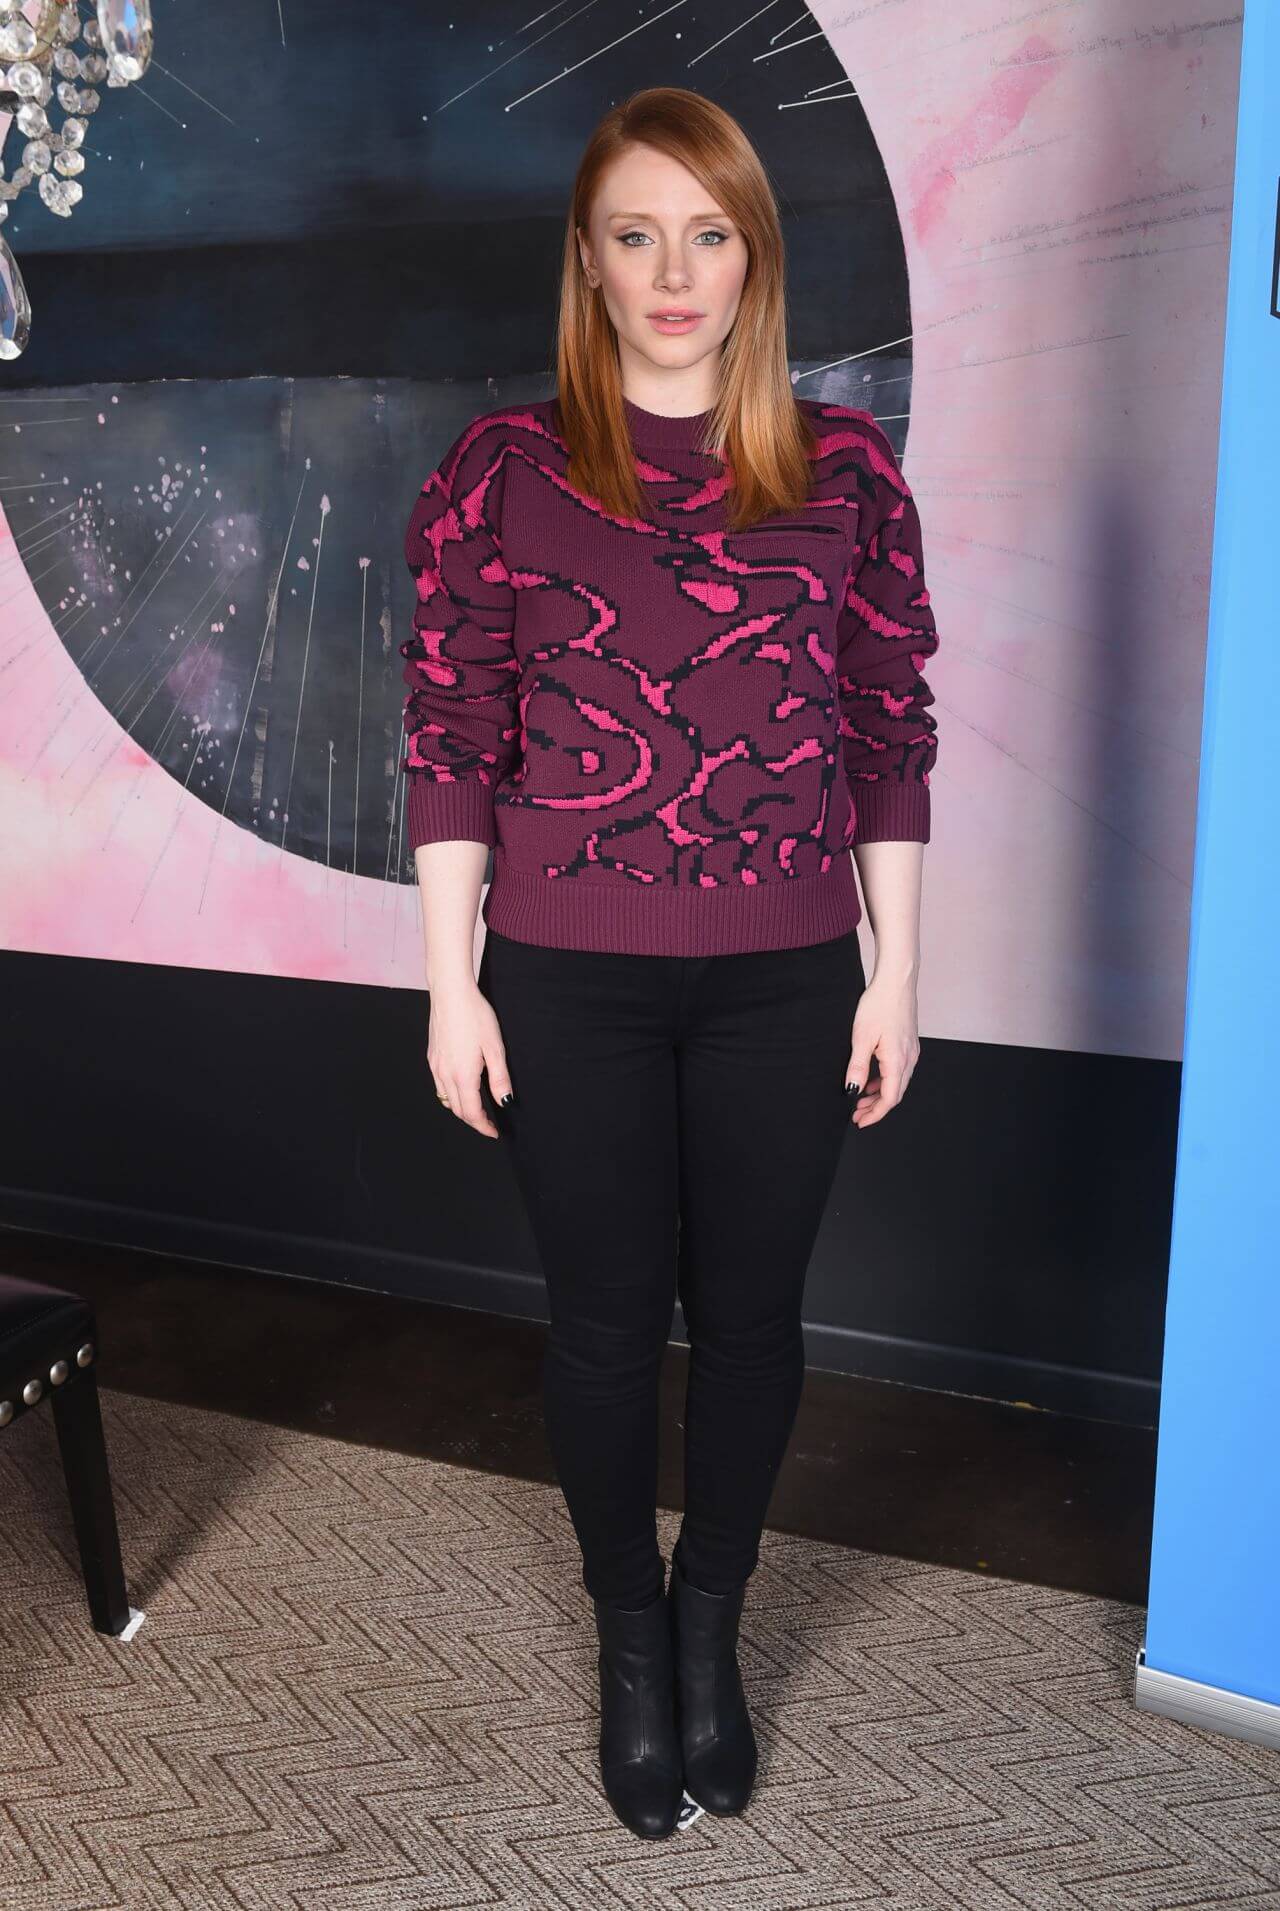 Bryce Dallas Howard In a Pink Woolen Sweater With Black Jeans At the SAG Indie Brunch for Directors in Park City, Utah